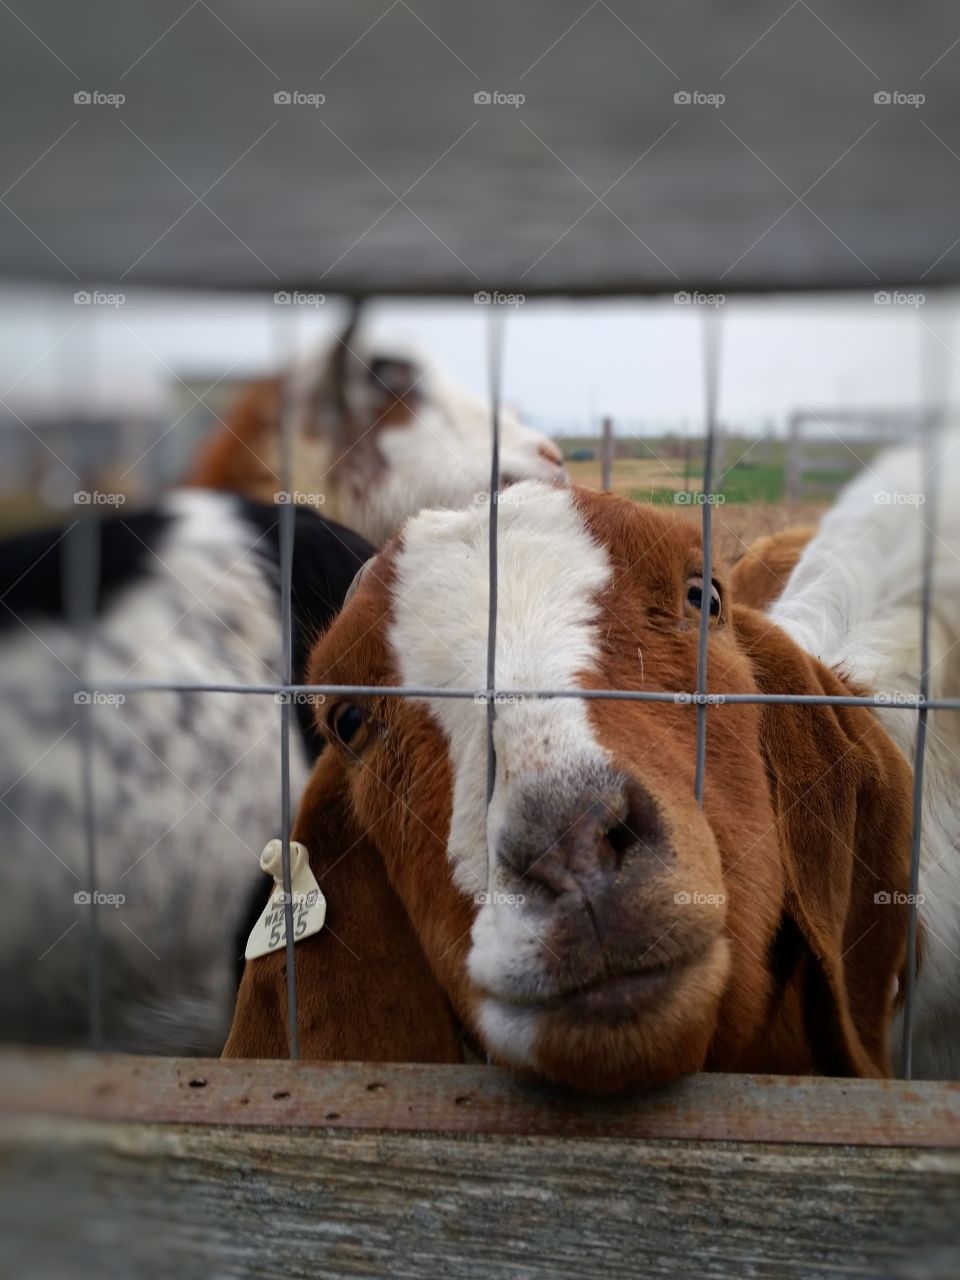 Goat Looking Through Fence